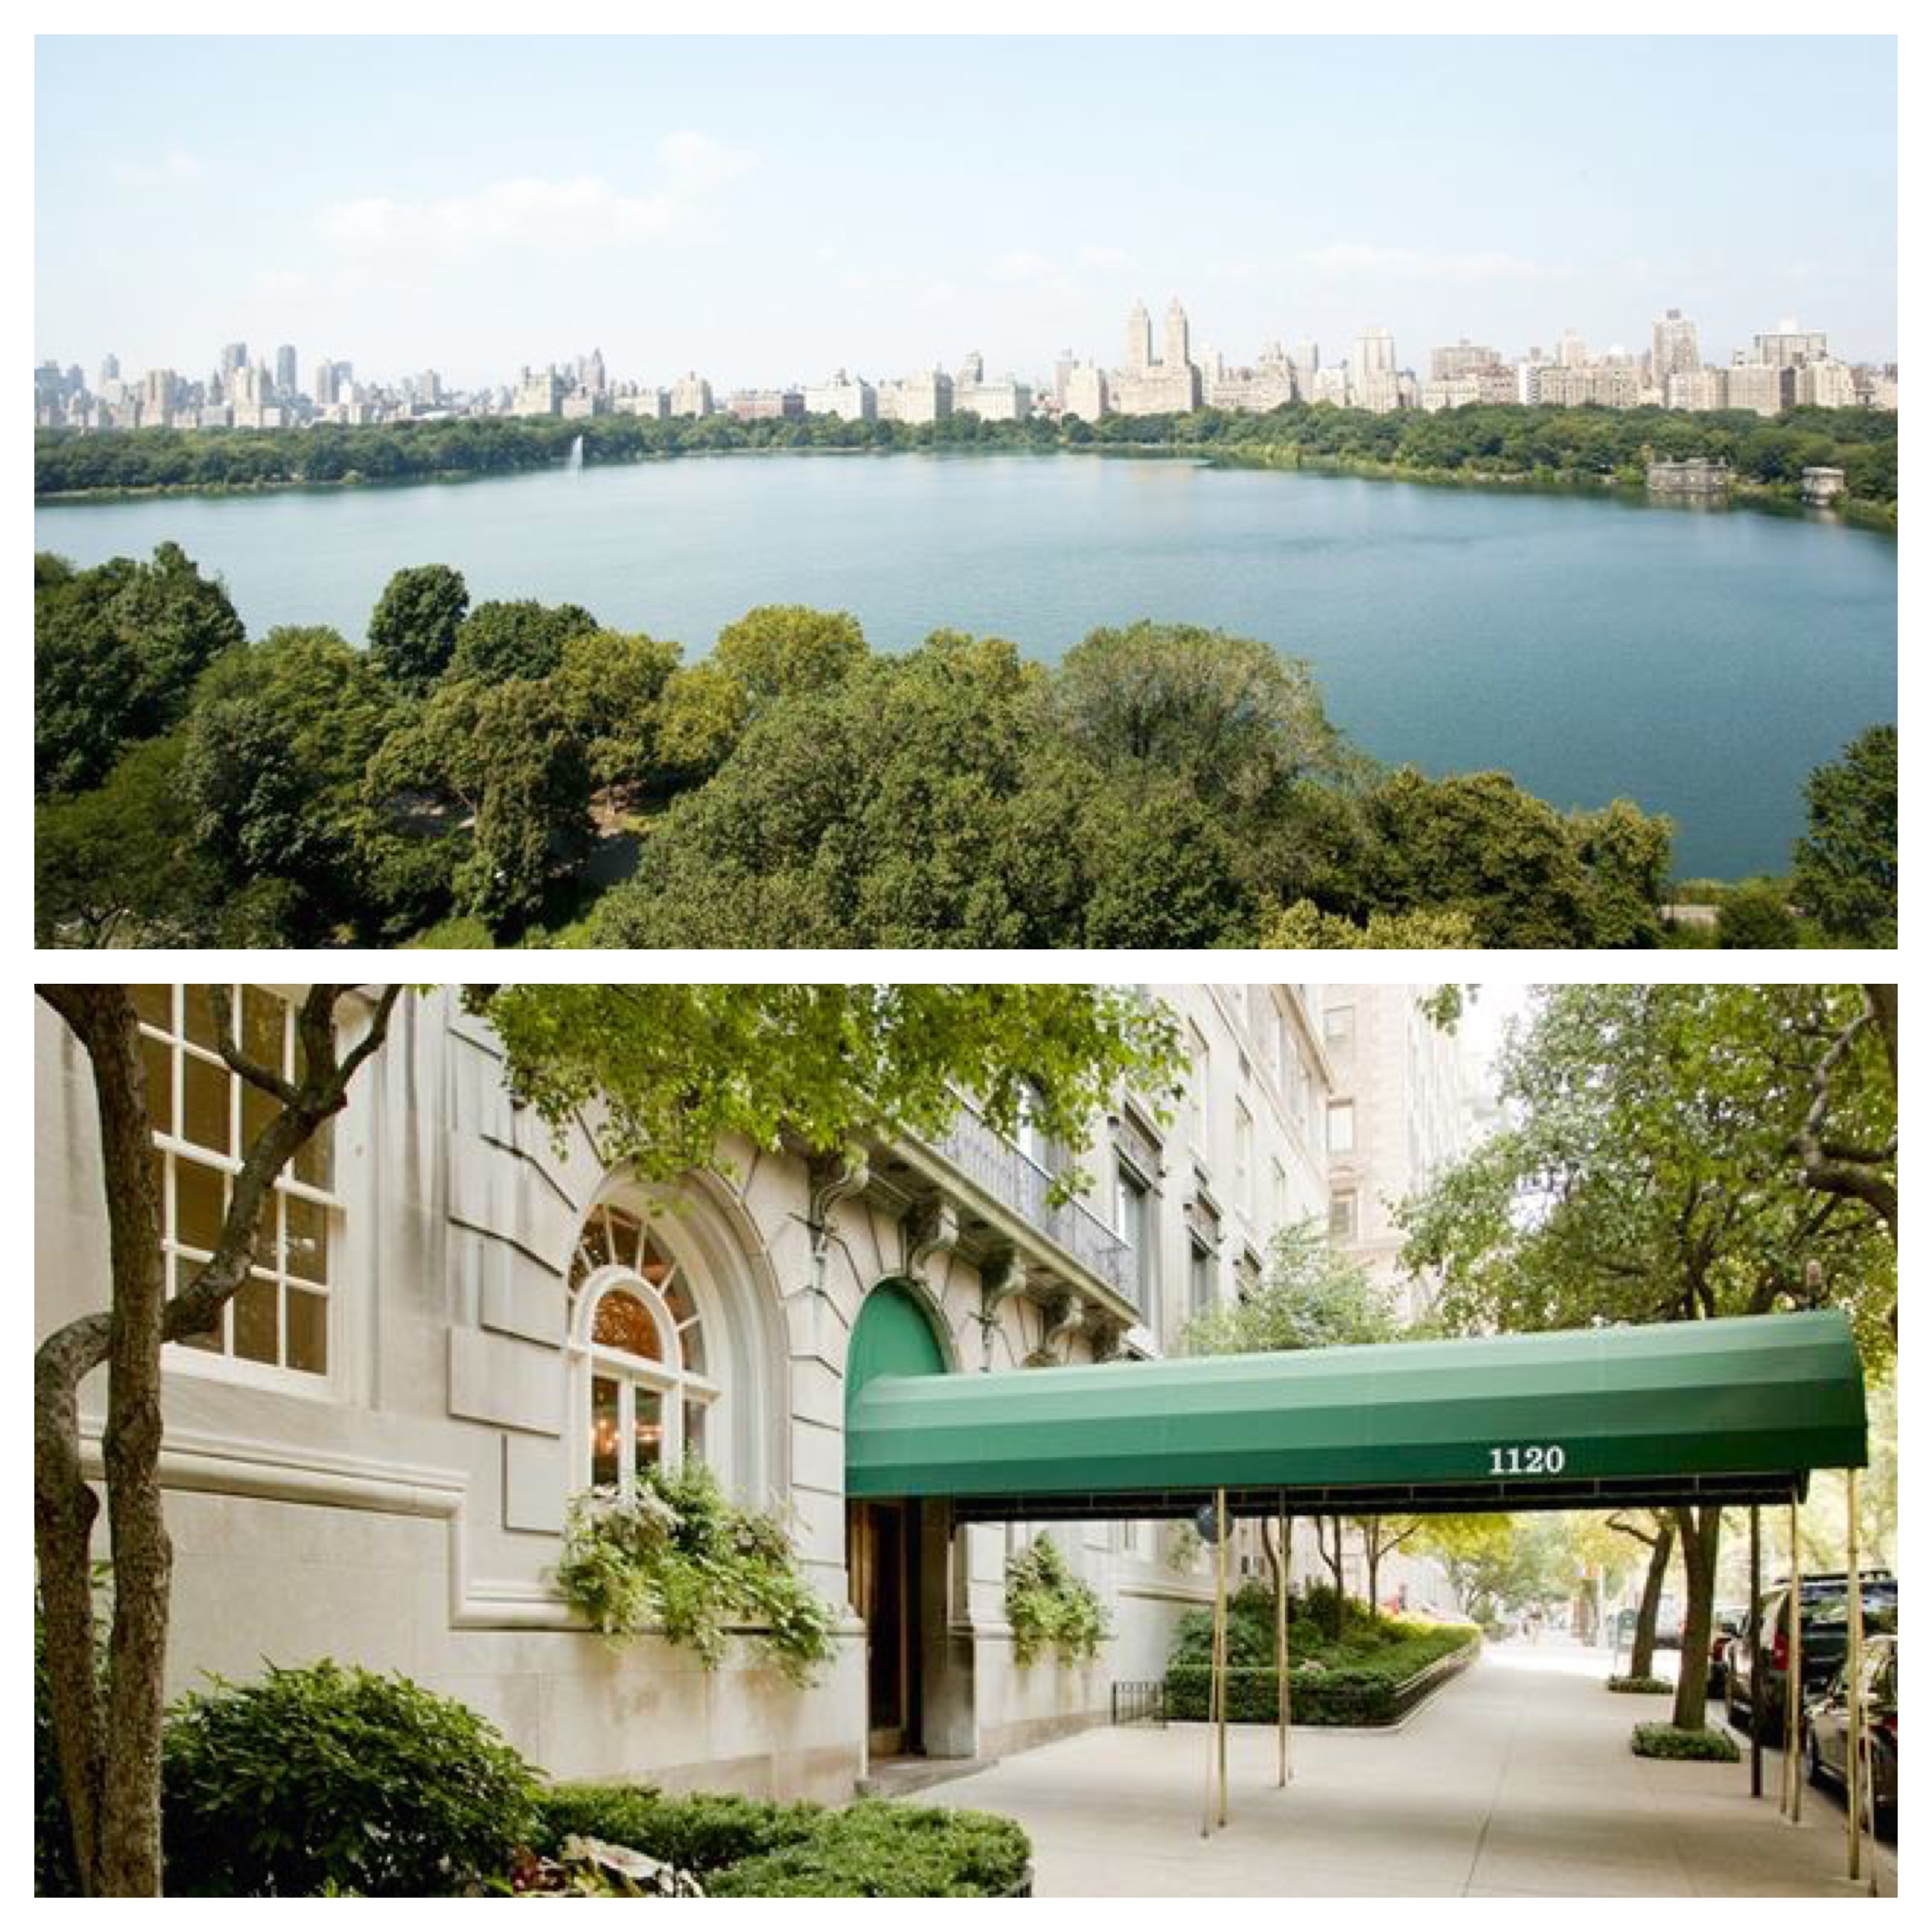 Central Park views from Manhattan's most expensive blocks on the Upper East Side. 